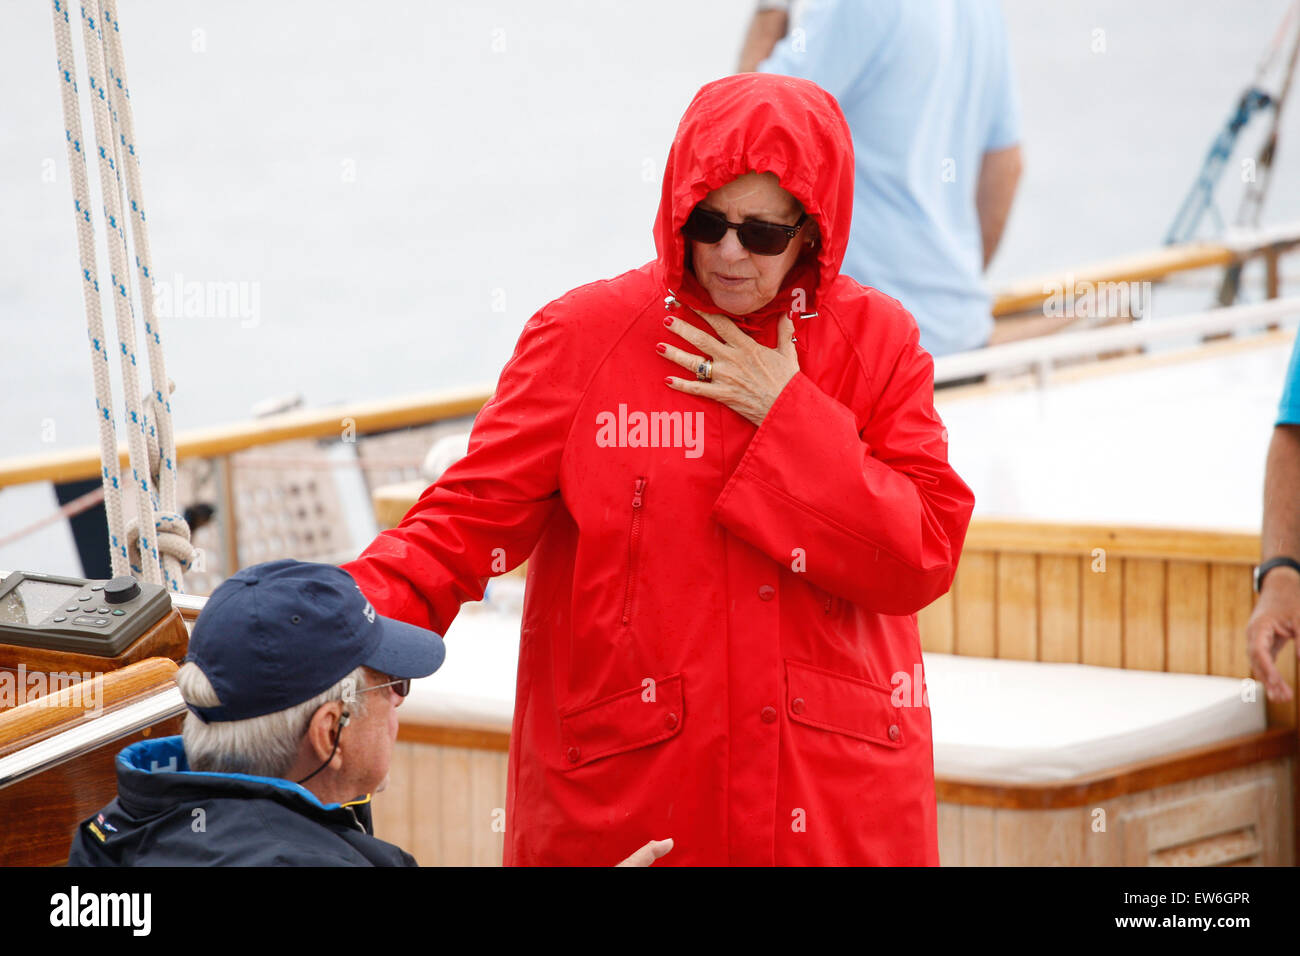 Spetses Island, GREECE. 18th June, 2015. King Constantine of Greece, Queen Anne-Marie of Greece on their traditional boat ''Afroessa at the port of Spetses island during the ''Spetses Classic Yacht Race Regatta' © Aristidis Vafeiadakis/ZUMA Wire/Alamy Live News Stock Photo